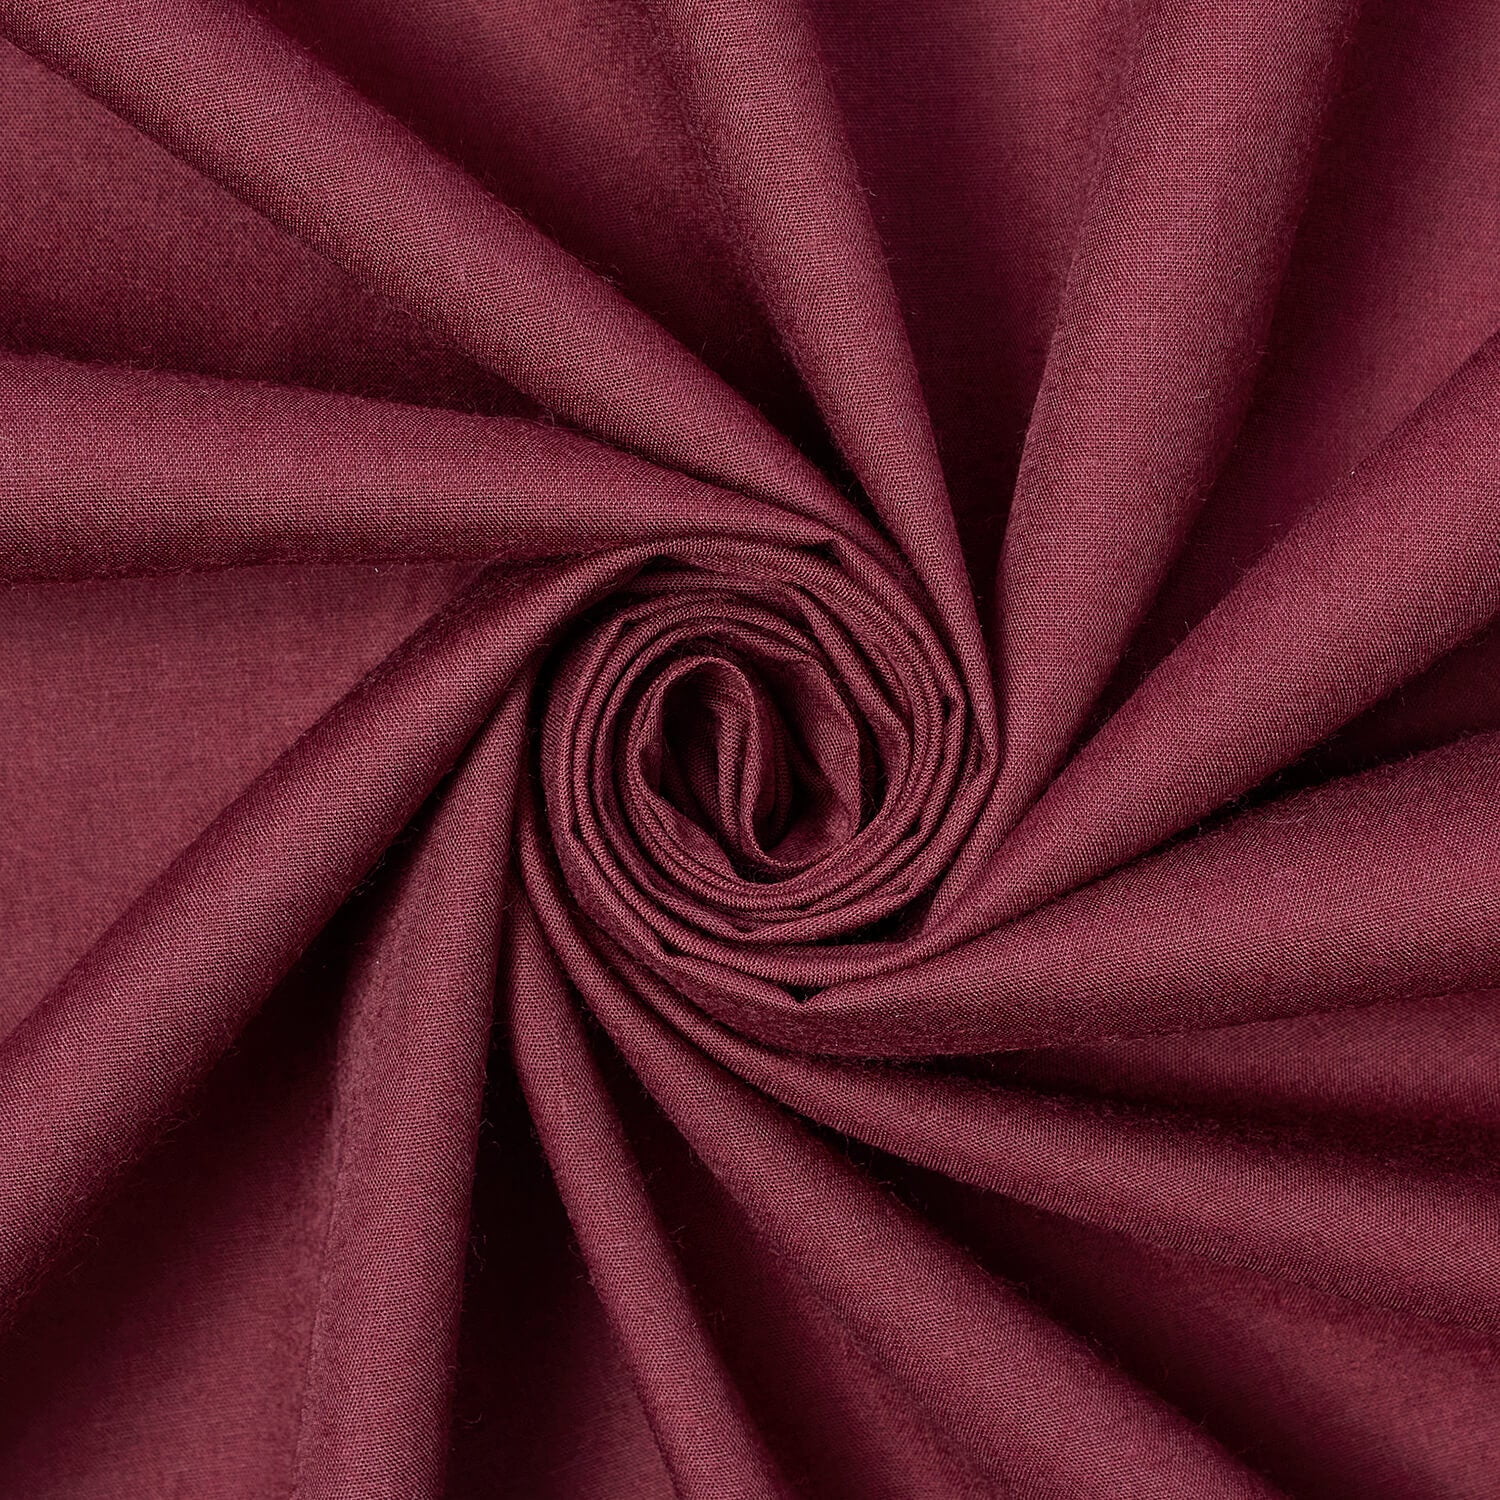 Cotton Polyester Broadcloth Fabric Premium Apparel Quilting 45 (Wine) 